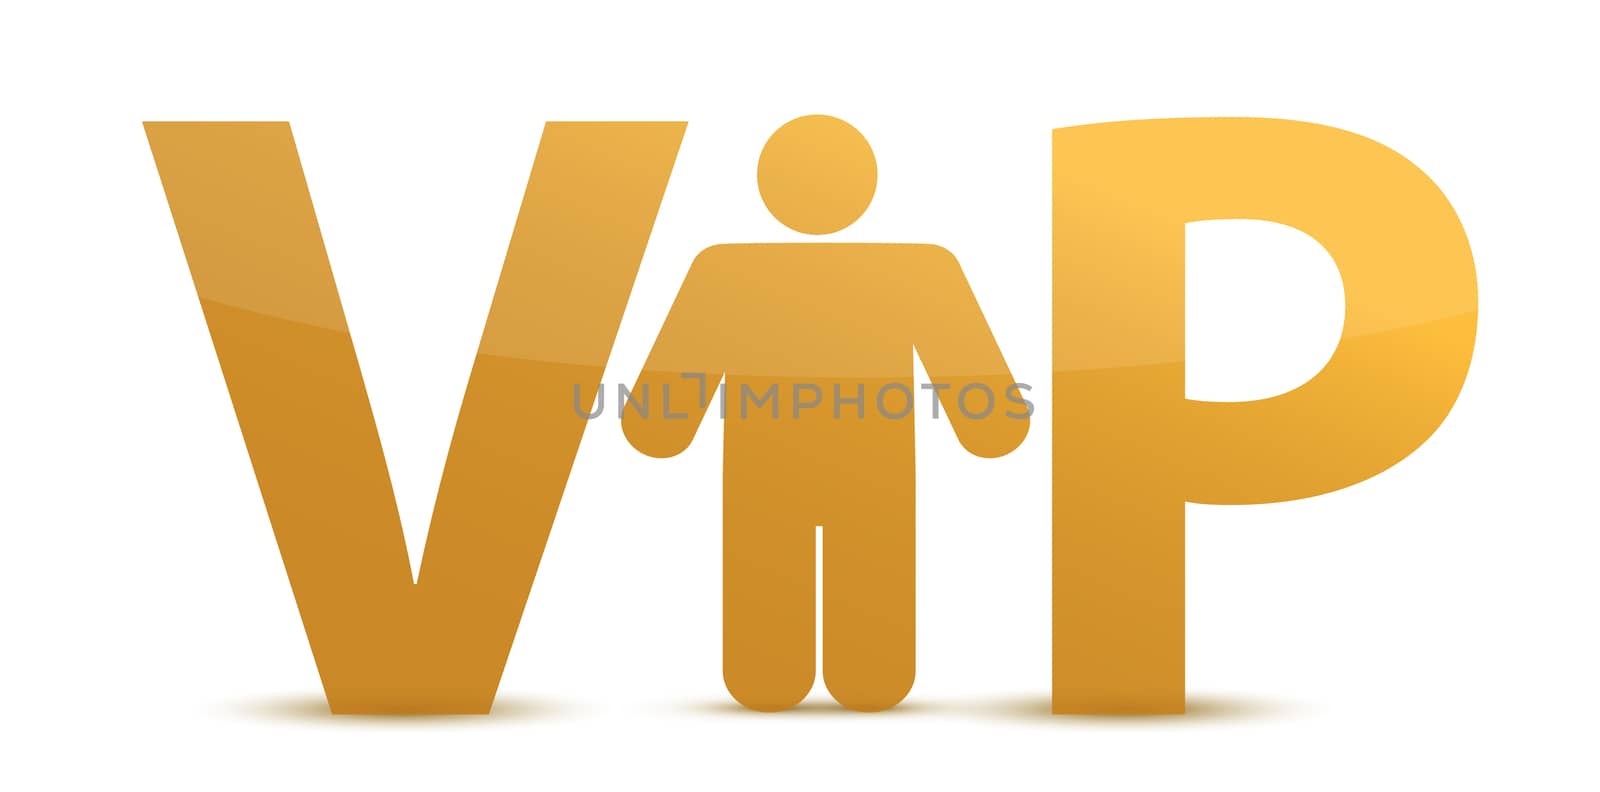 VIP person. Golden letters and human figure